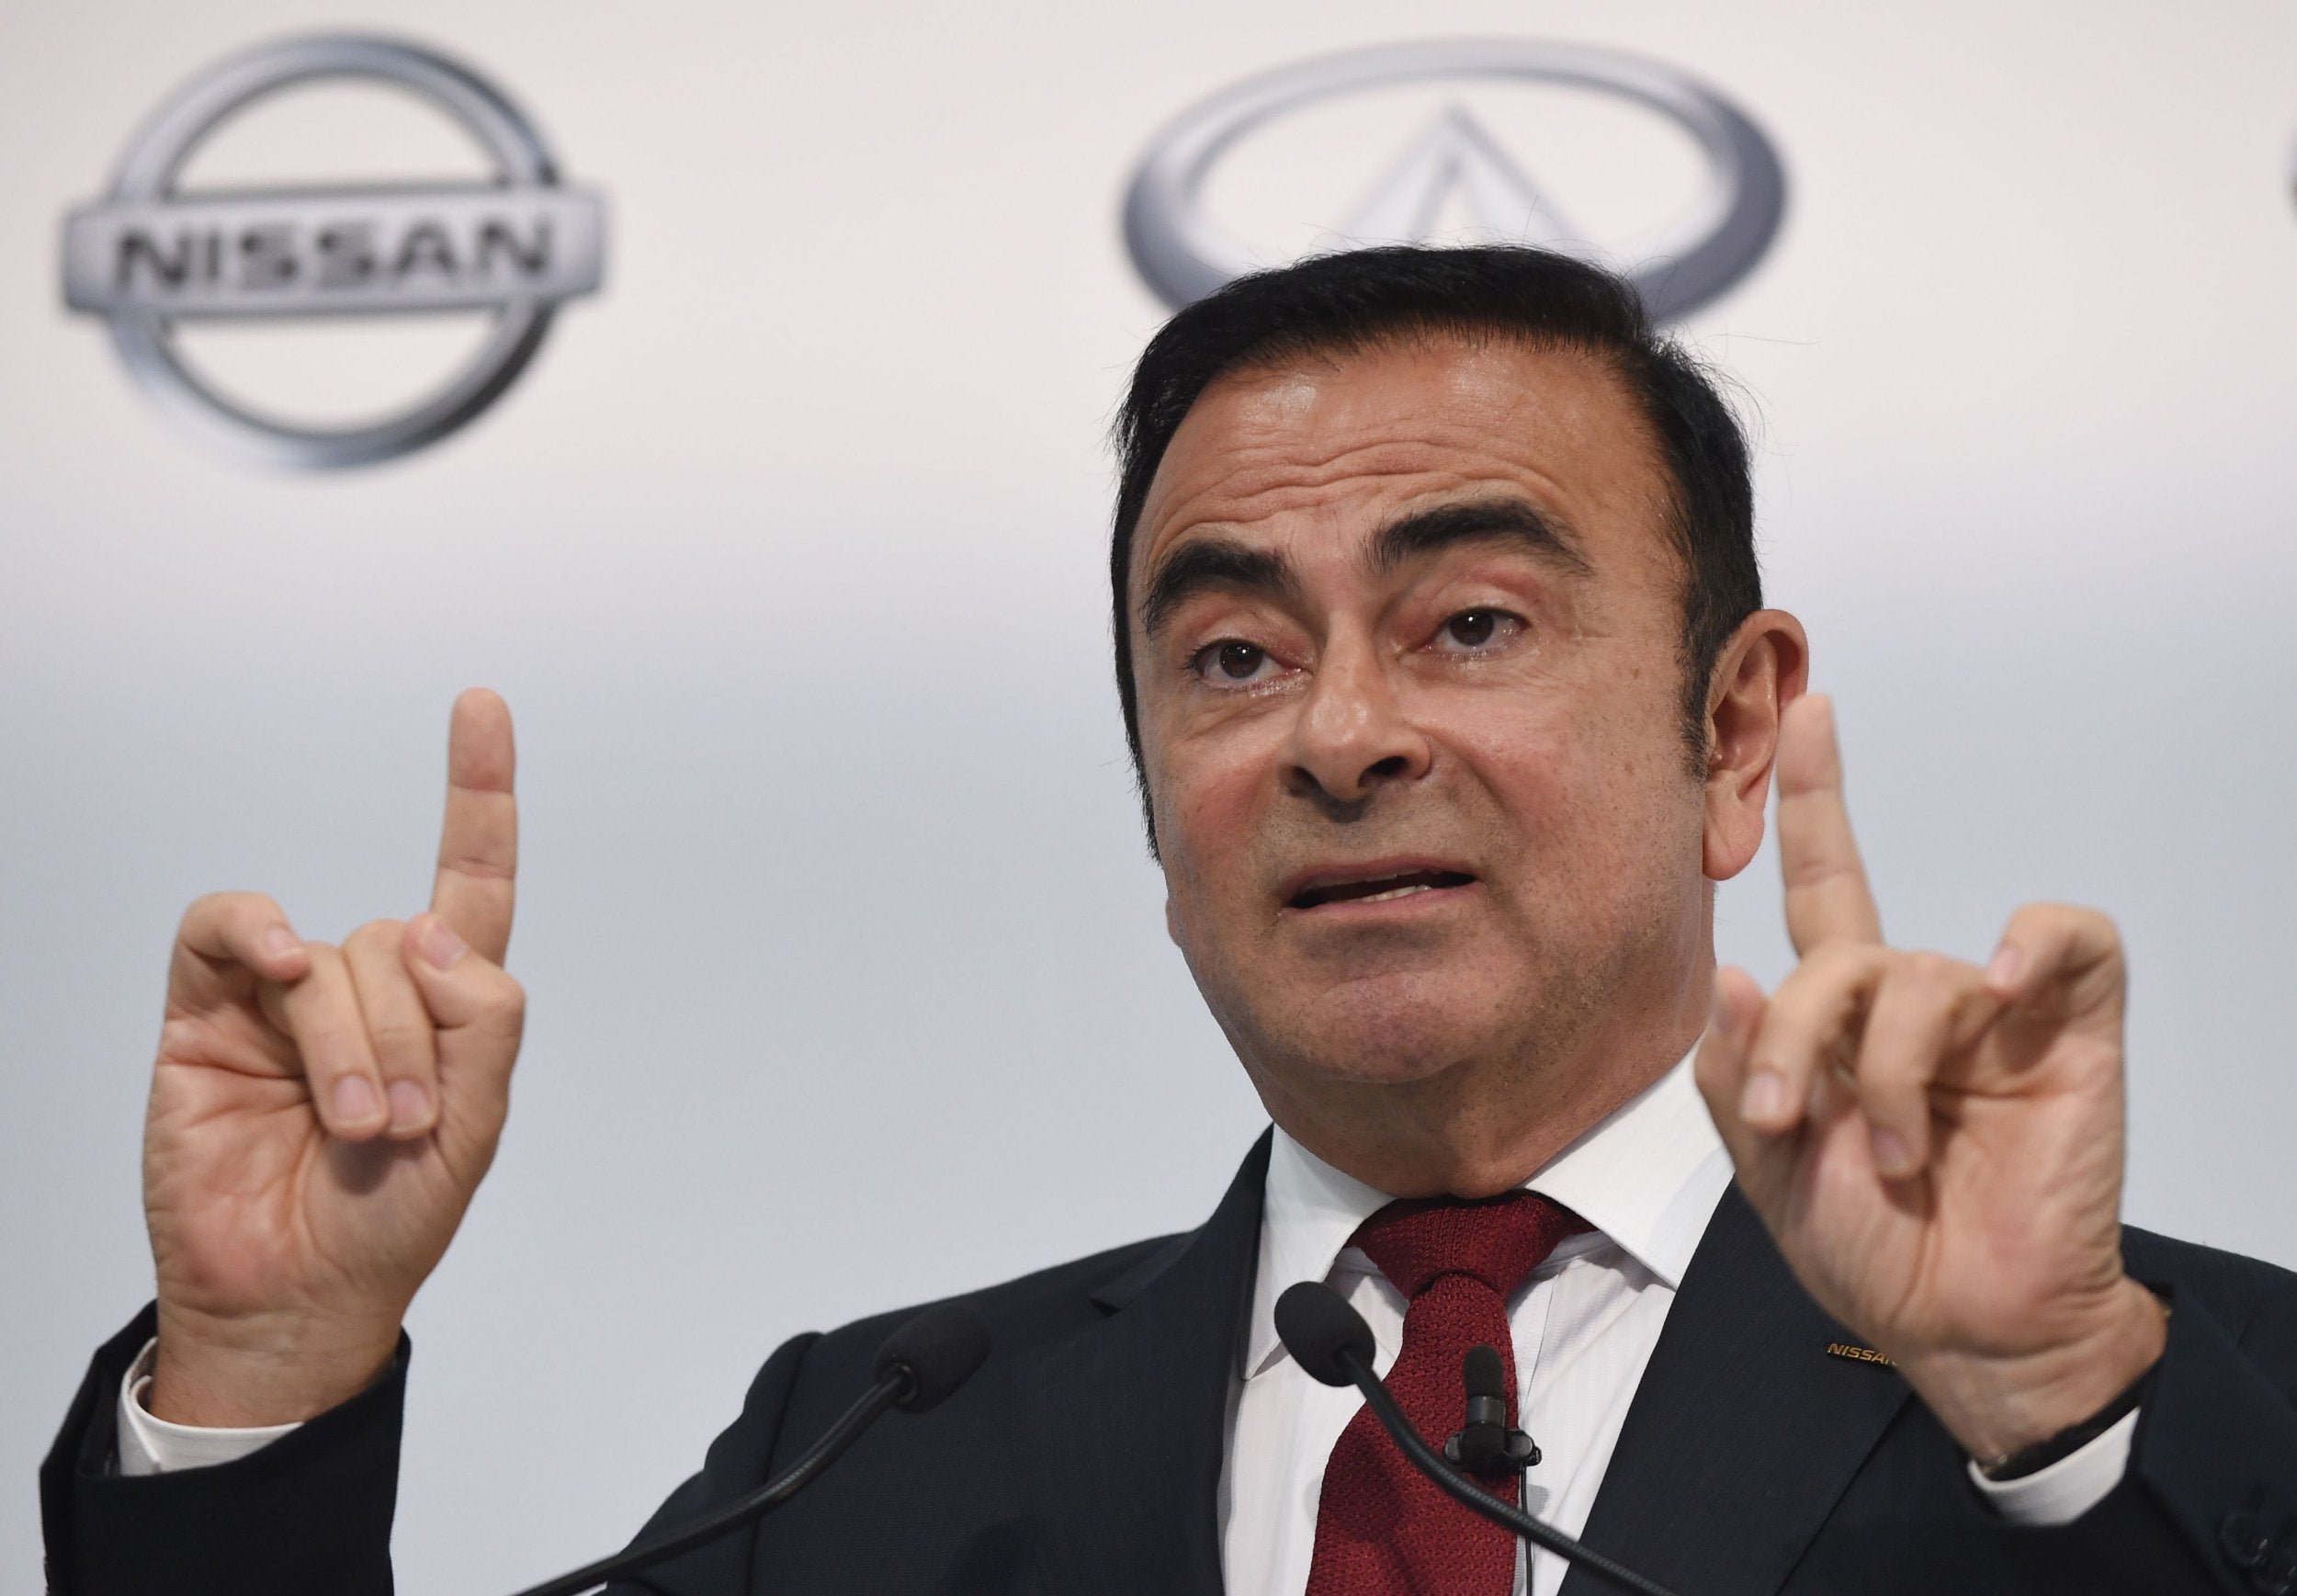 Mr Ghosn has been held in Spartan conditions at a Tokyo detention facility since he was taken into custody on 19 November